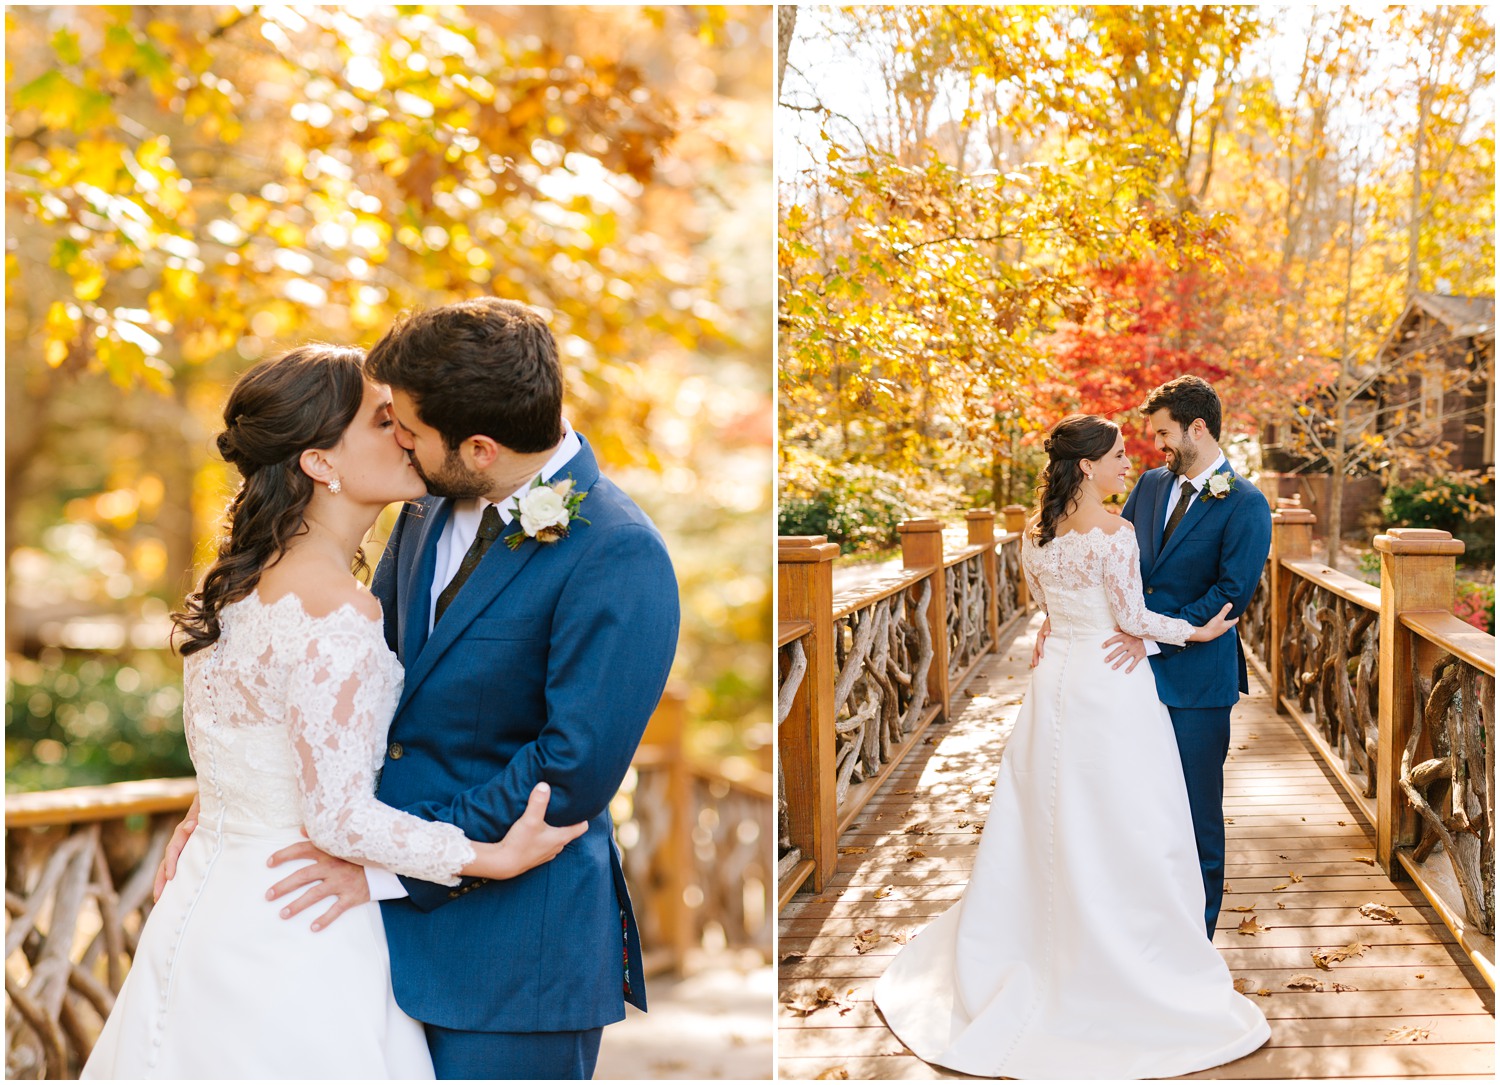 fall wedding day first look with bride wearing wedding gown with lace sleeves